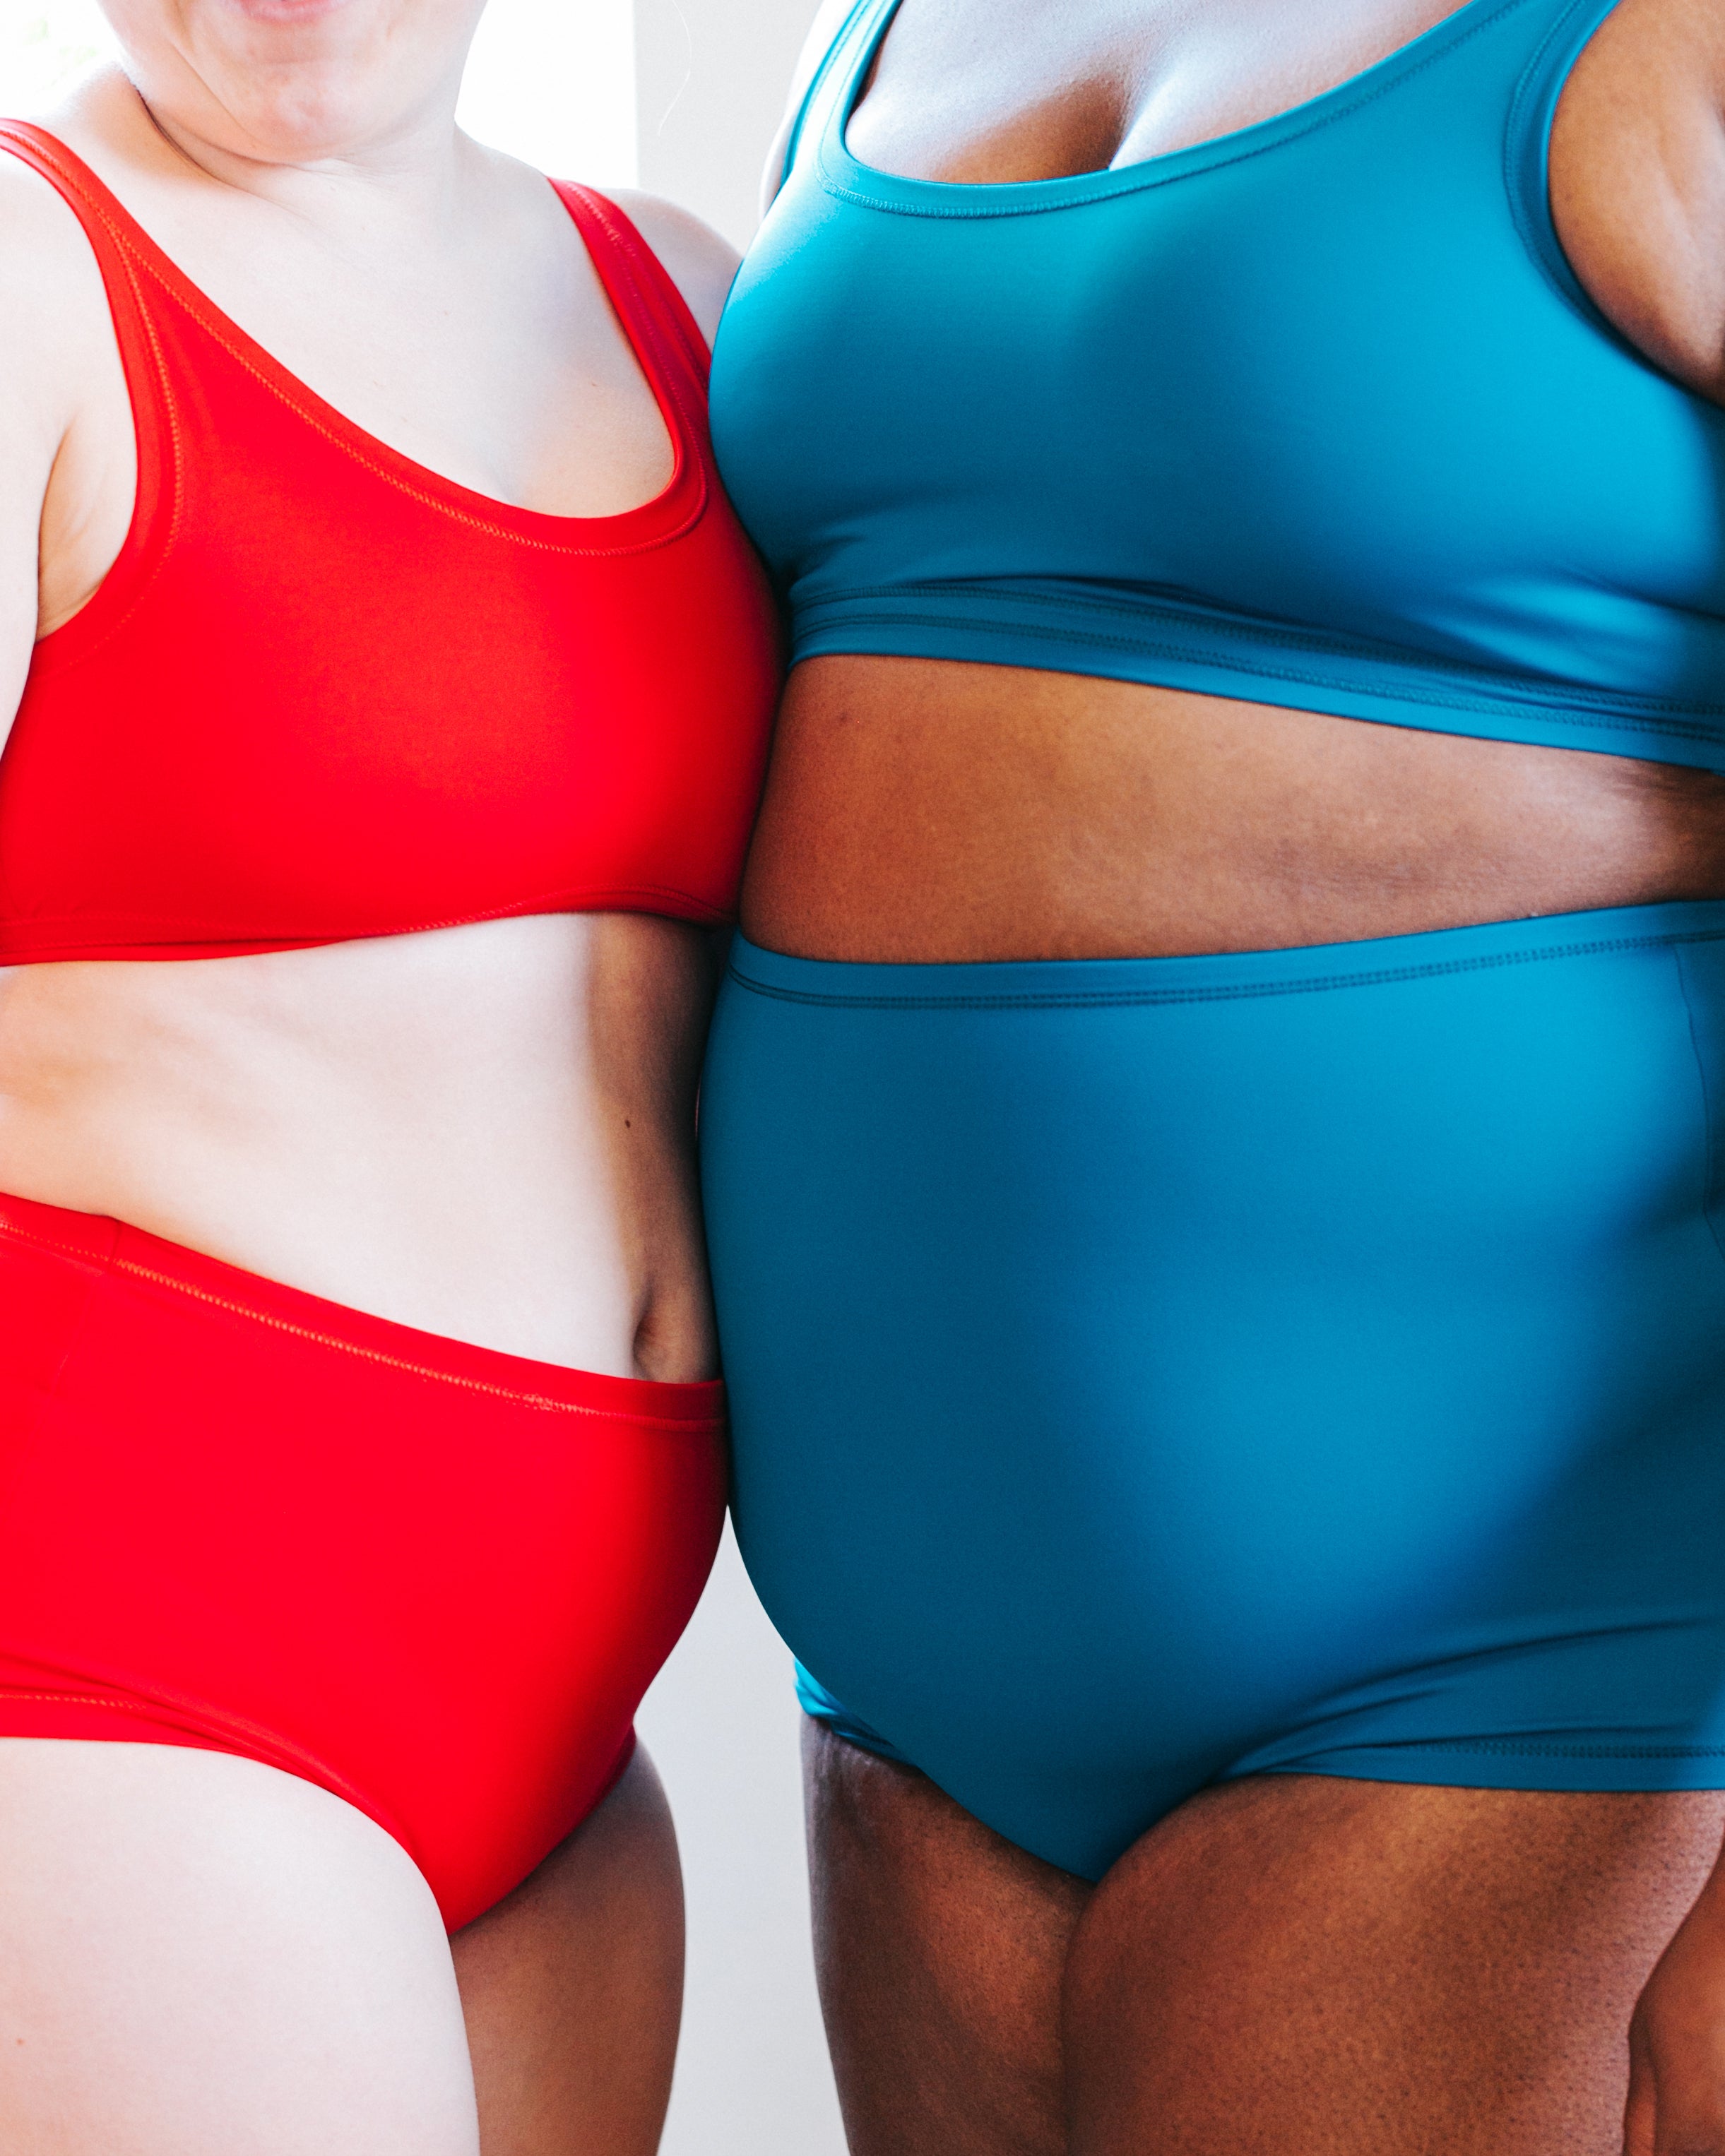 Close up of models standing together wearing Classic Red and Marina Blue Swimwear sets.